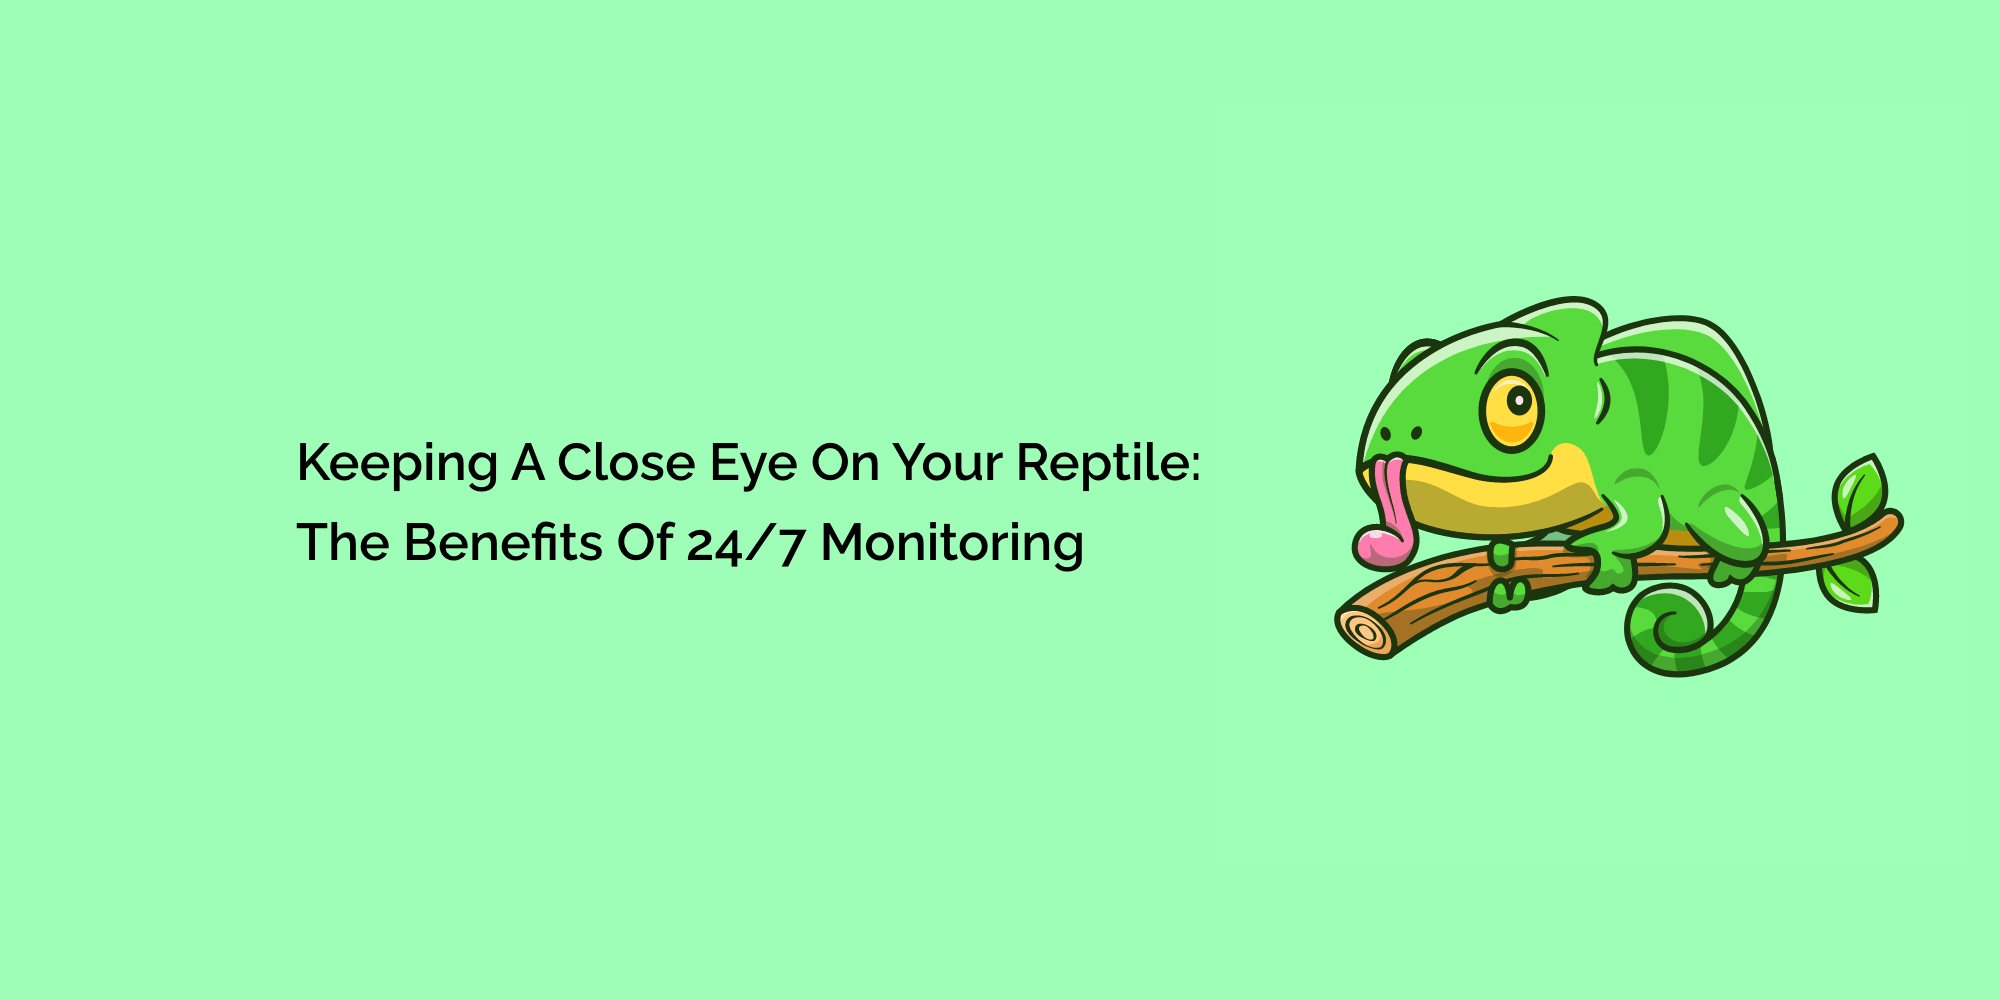 Keeping a Close Eye on Your Reptile: The Benefits of 24/7 Monitoring